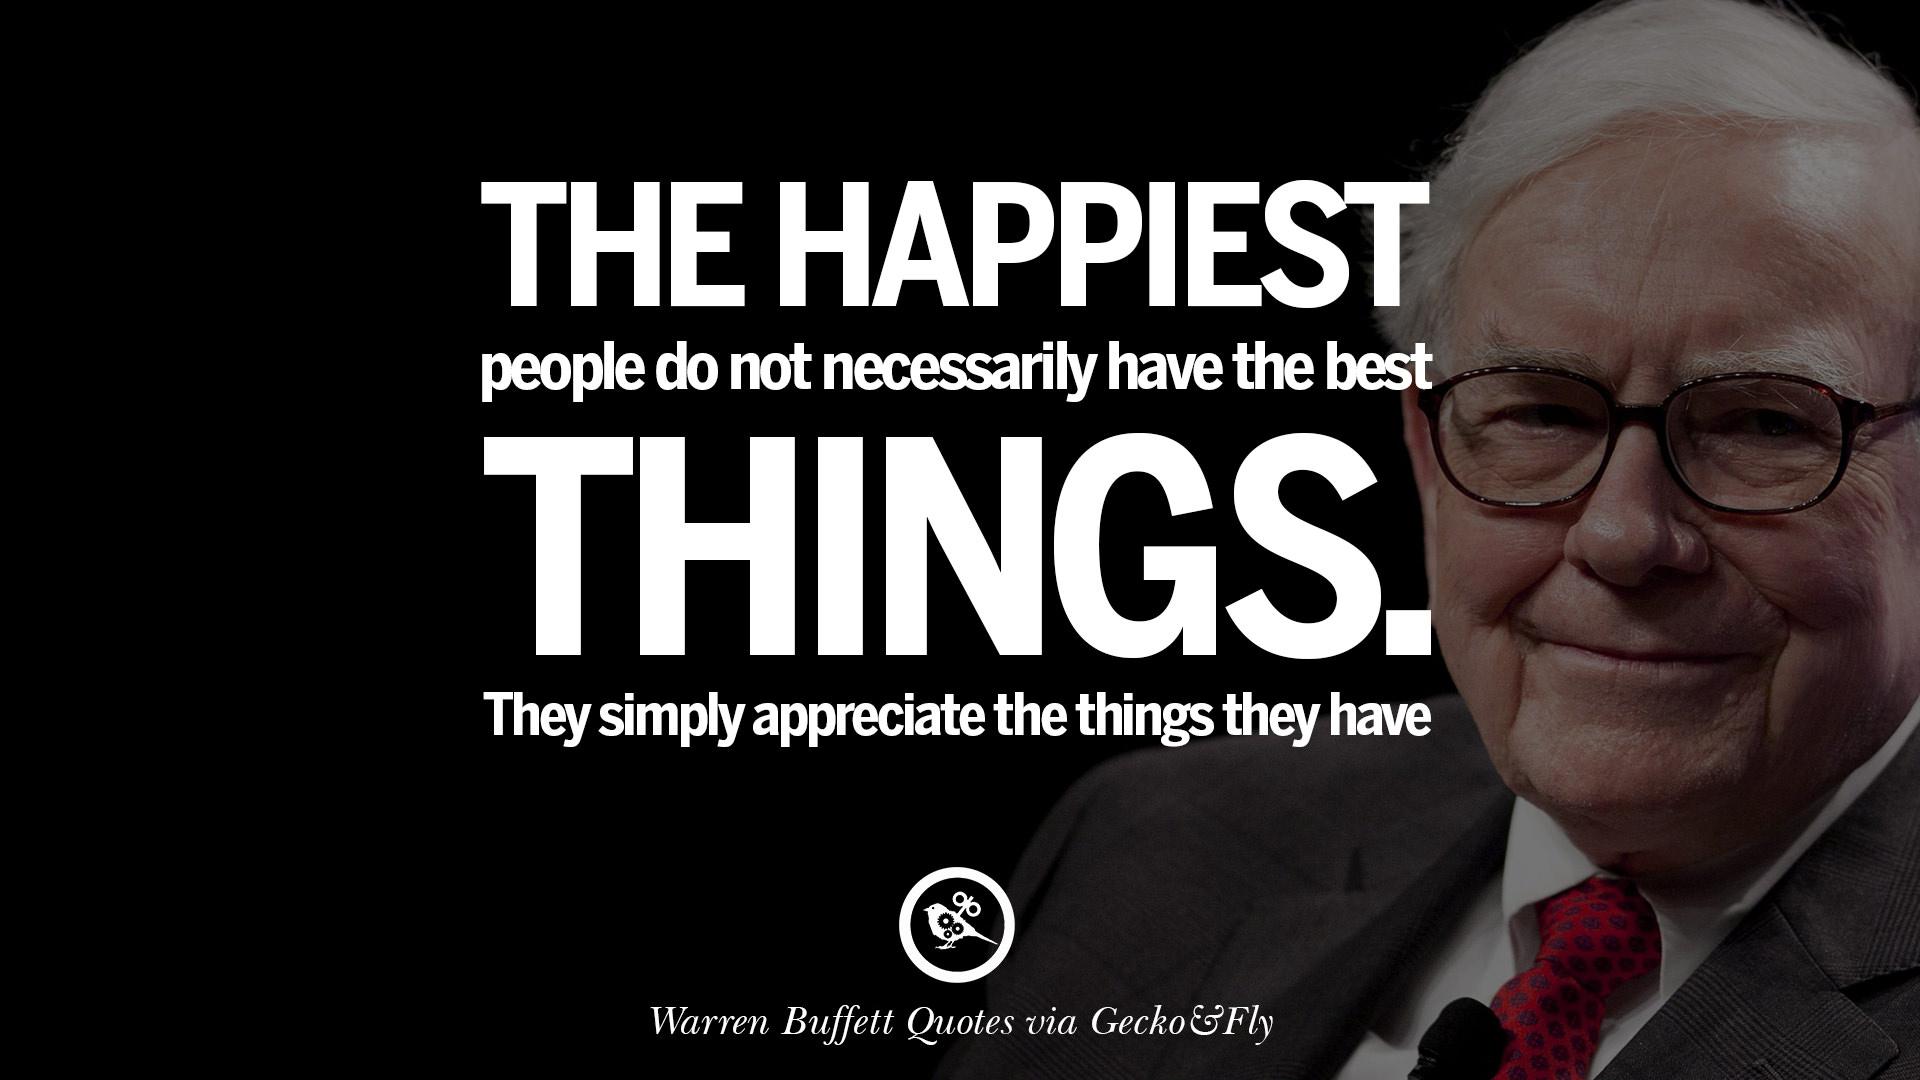 12 Best Warren Buffett Quotes on Investment, Life and Making Money